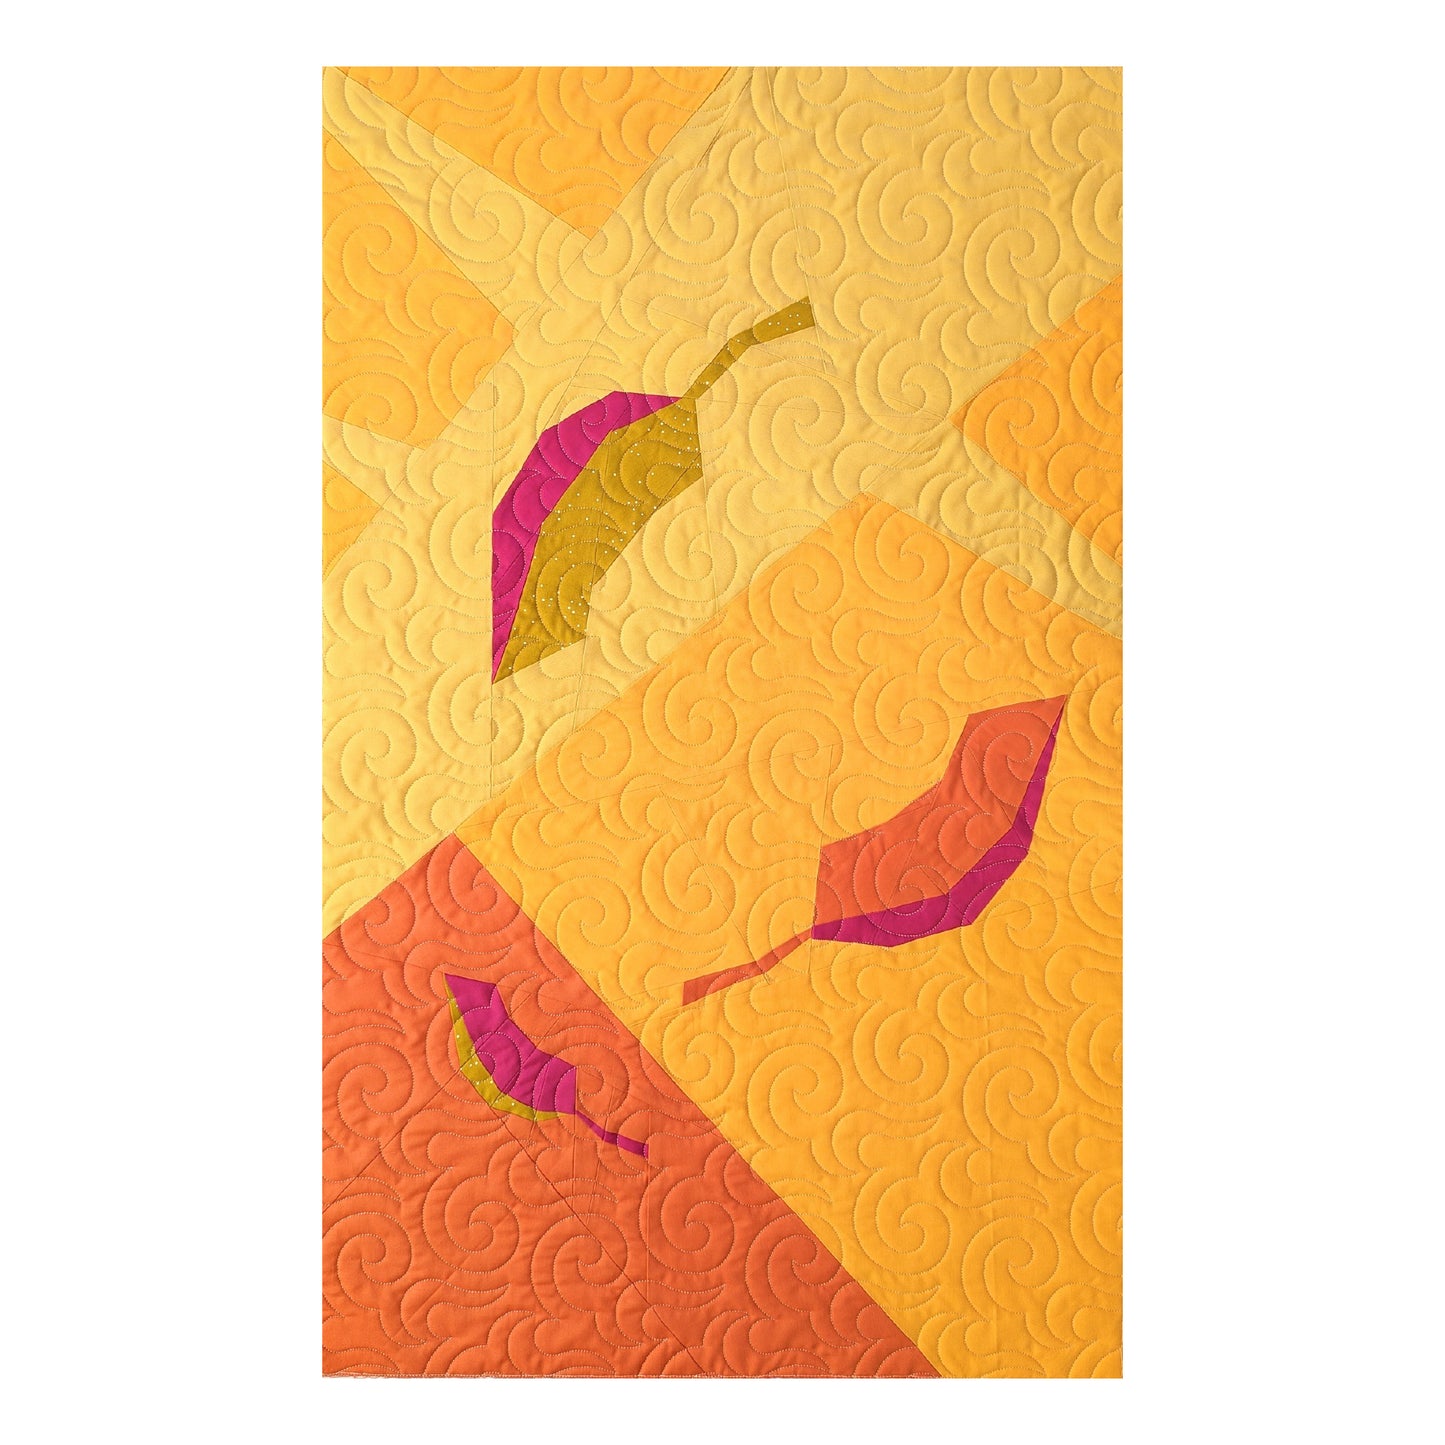 Autumn Leaves Wall Hanging